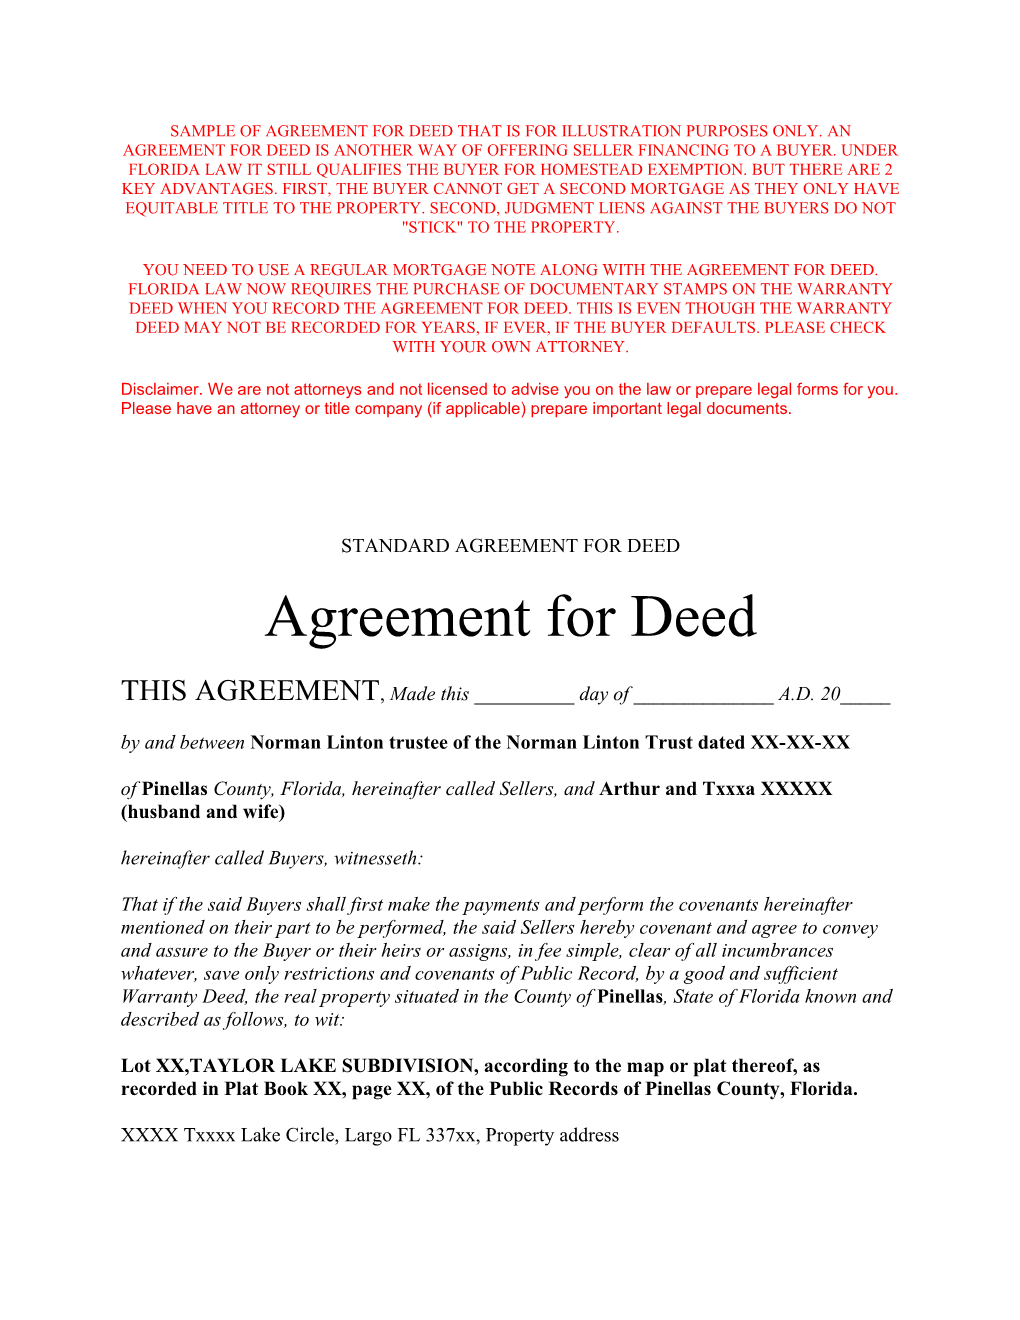 Standard Agreement for Deed